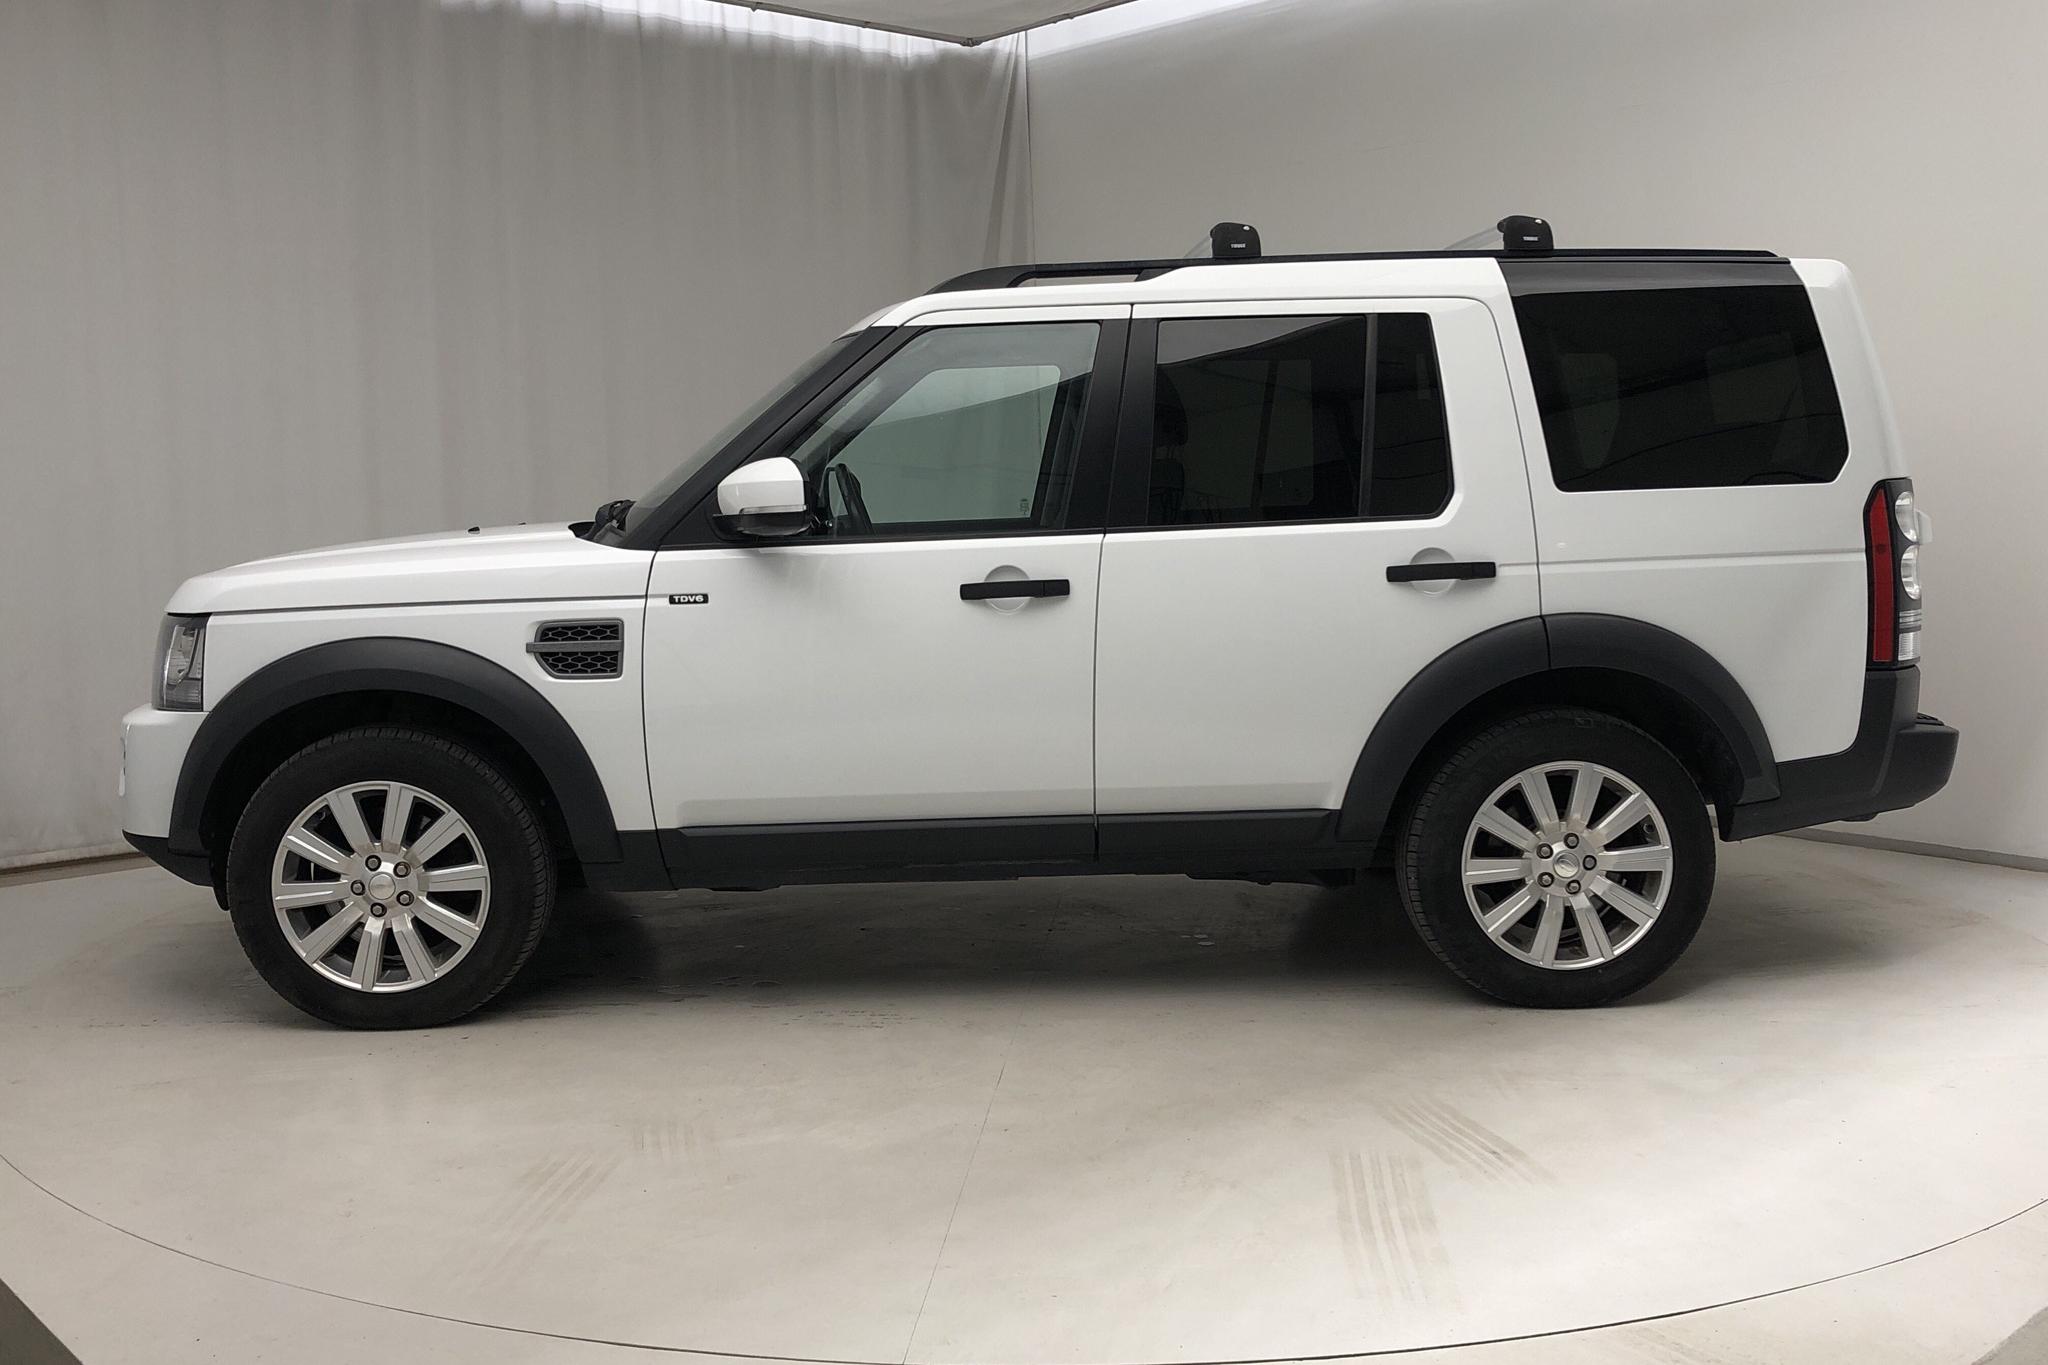 Land Rover Discovery 4 3.0 TDV6 (210hk) - 226 560 km - Automatic - white - 2014